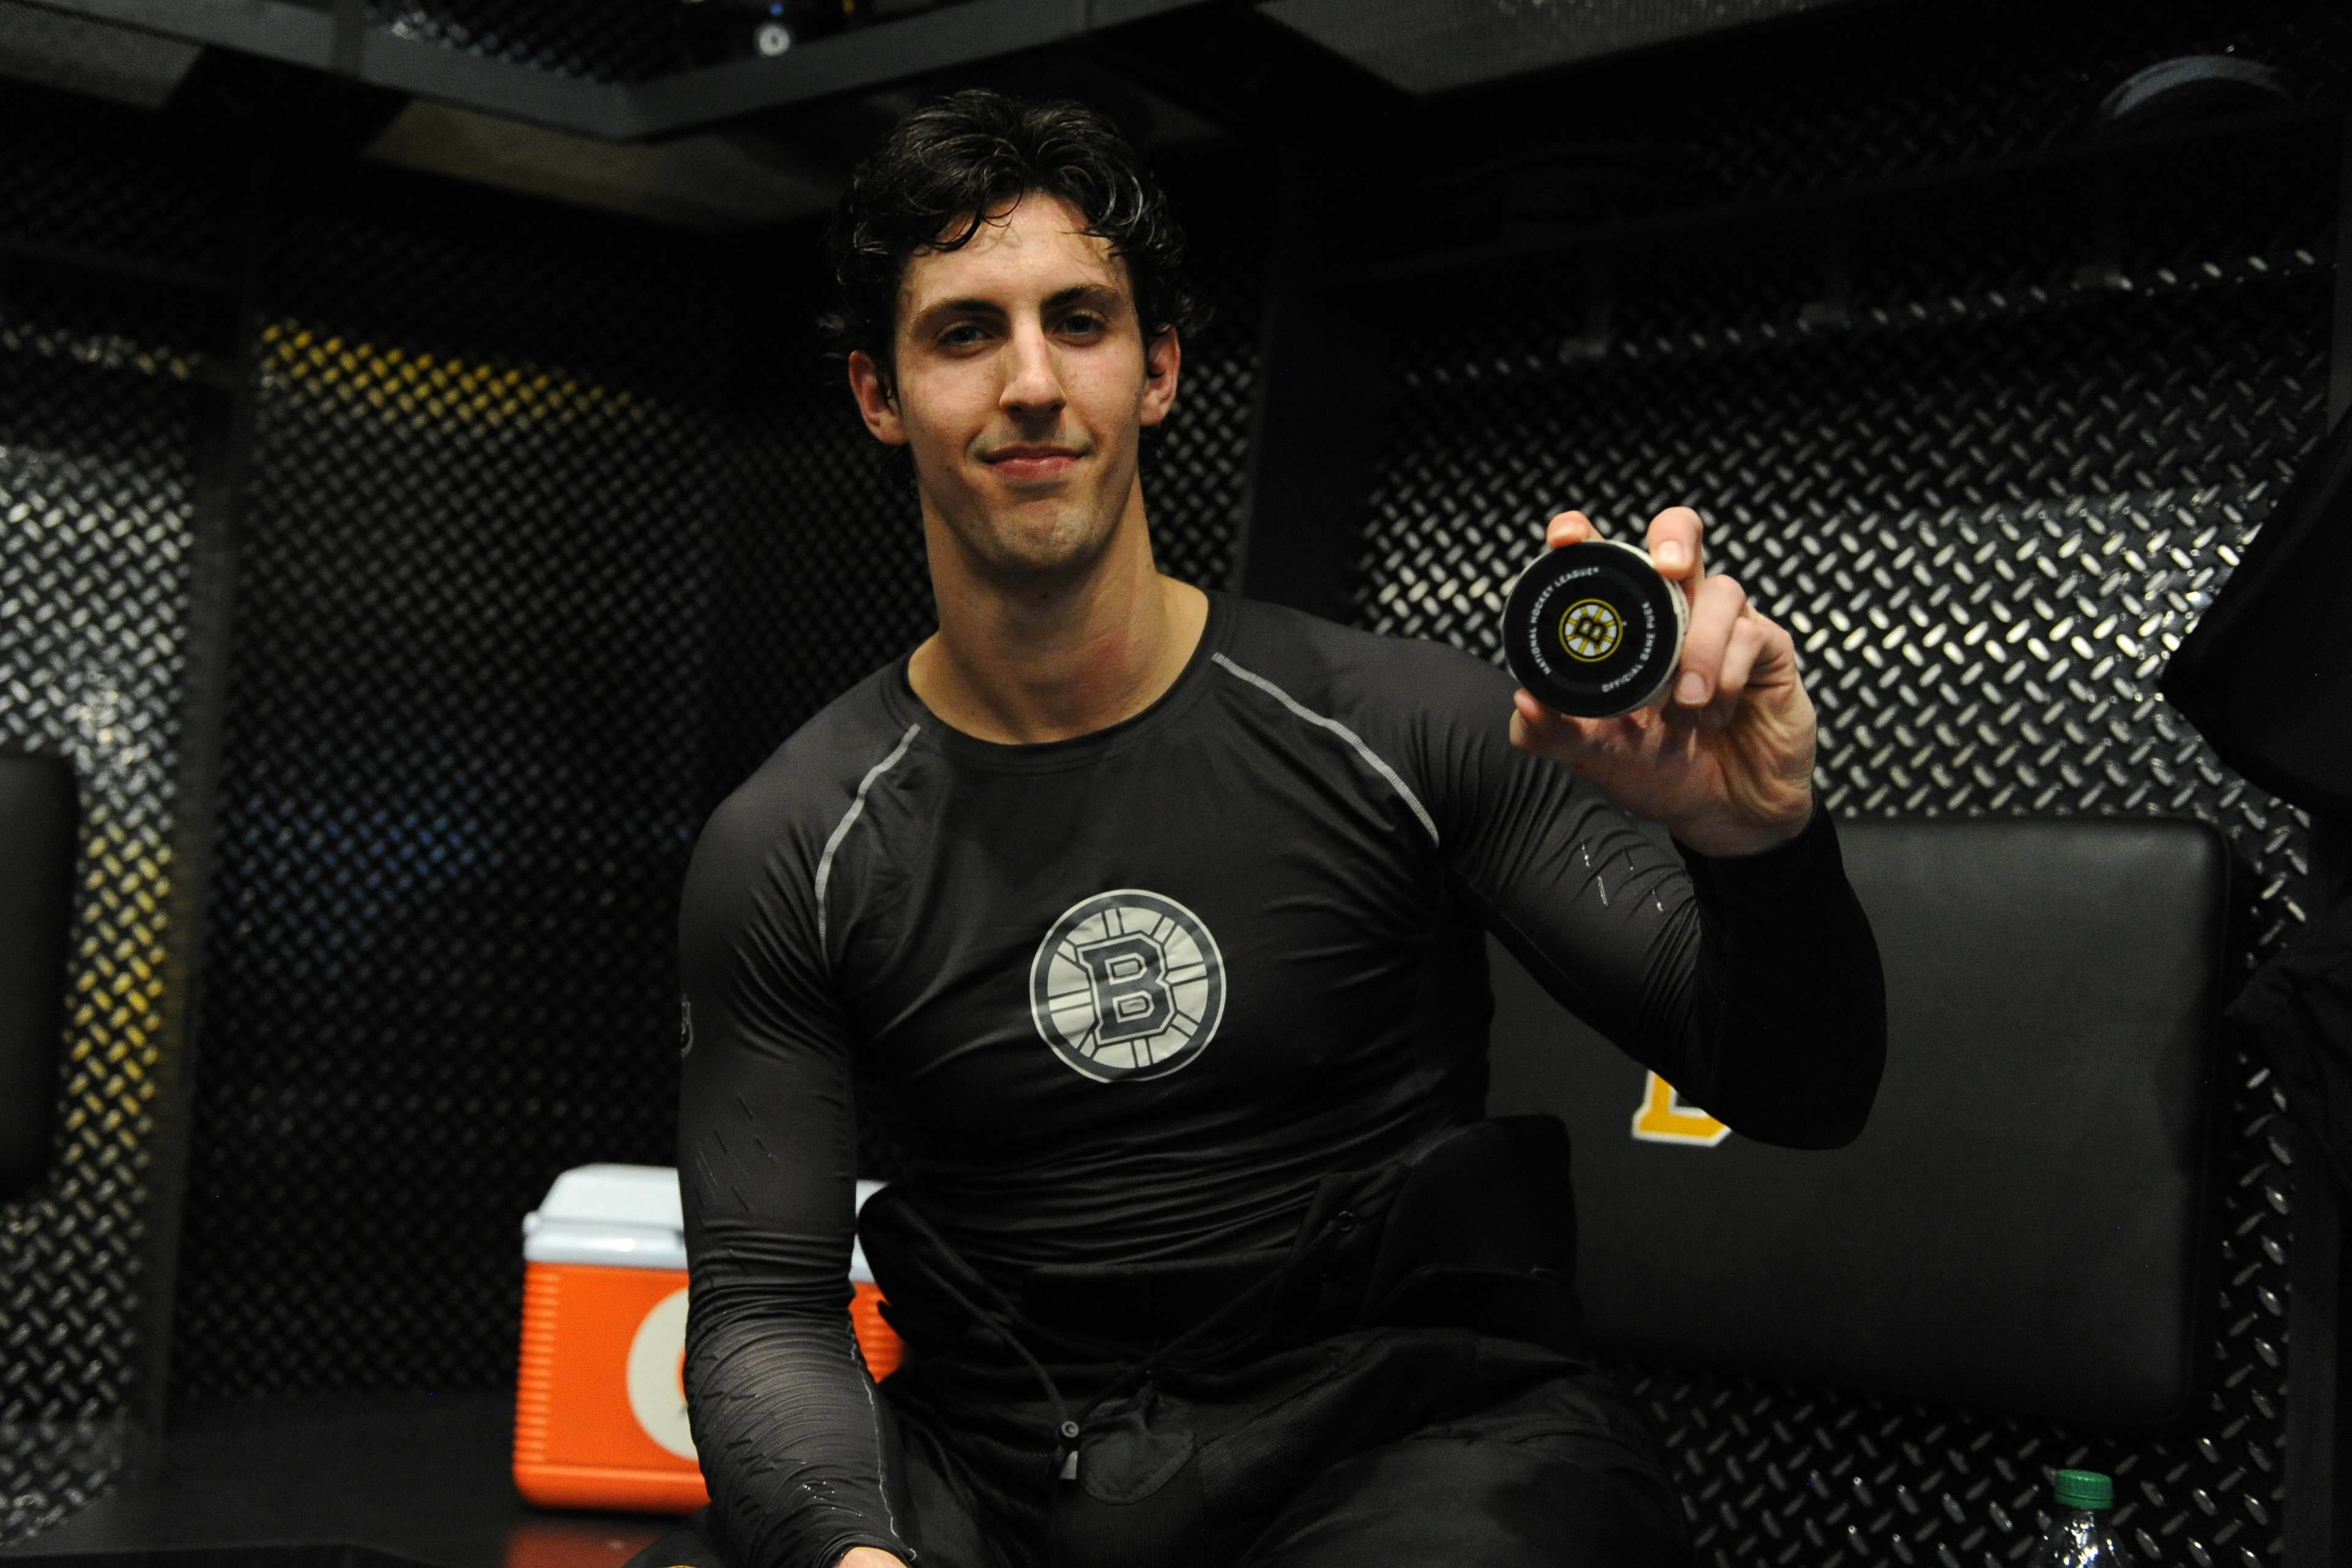 Billerica's Marc McLaughlin reflects on first week, goal while with Boston  Bruins